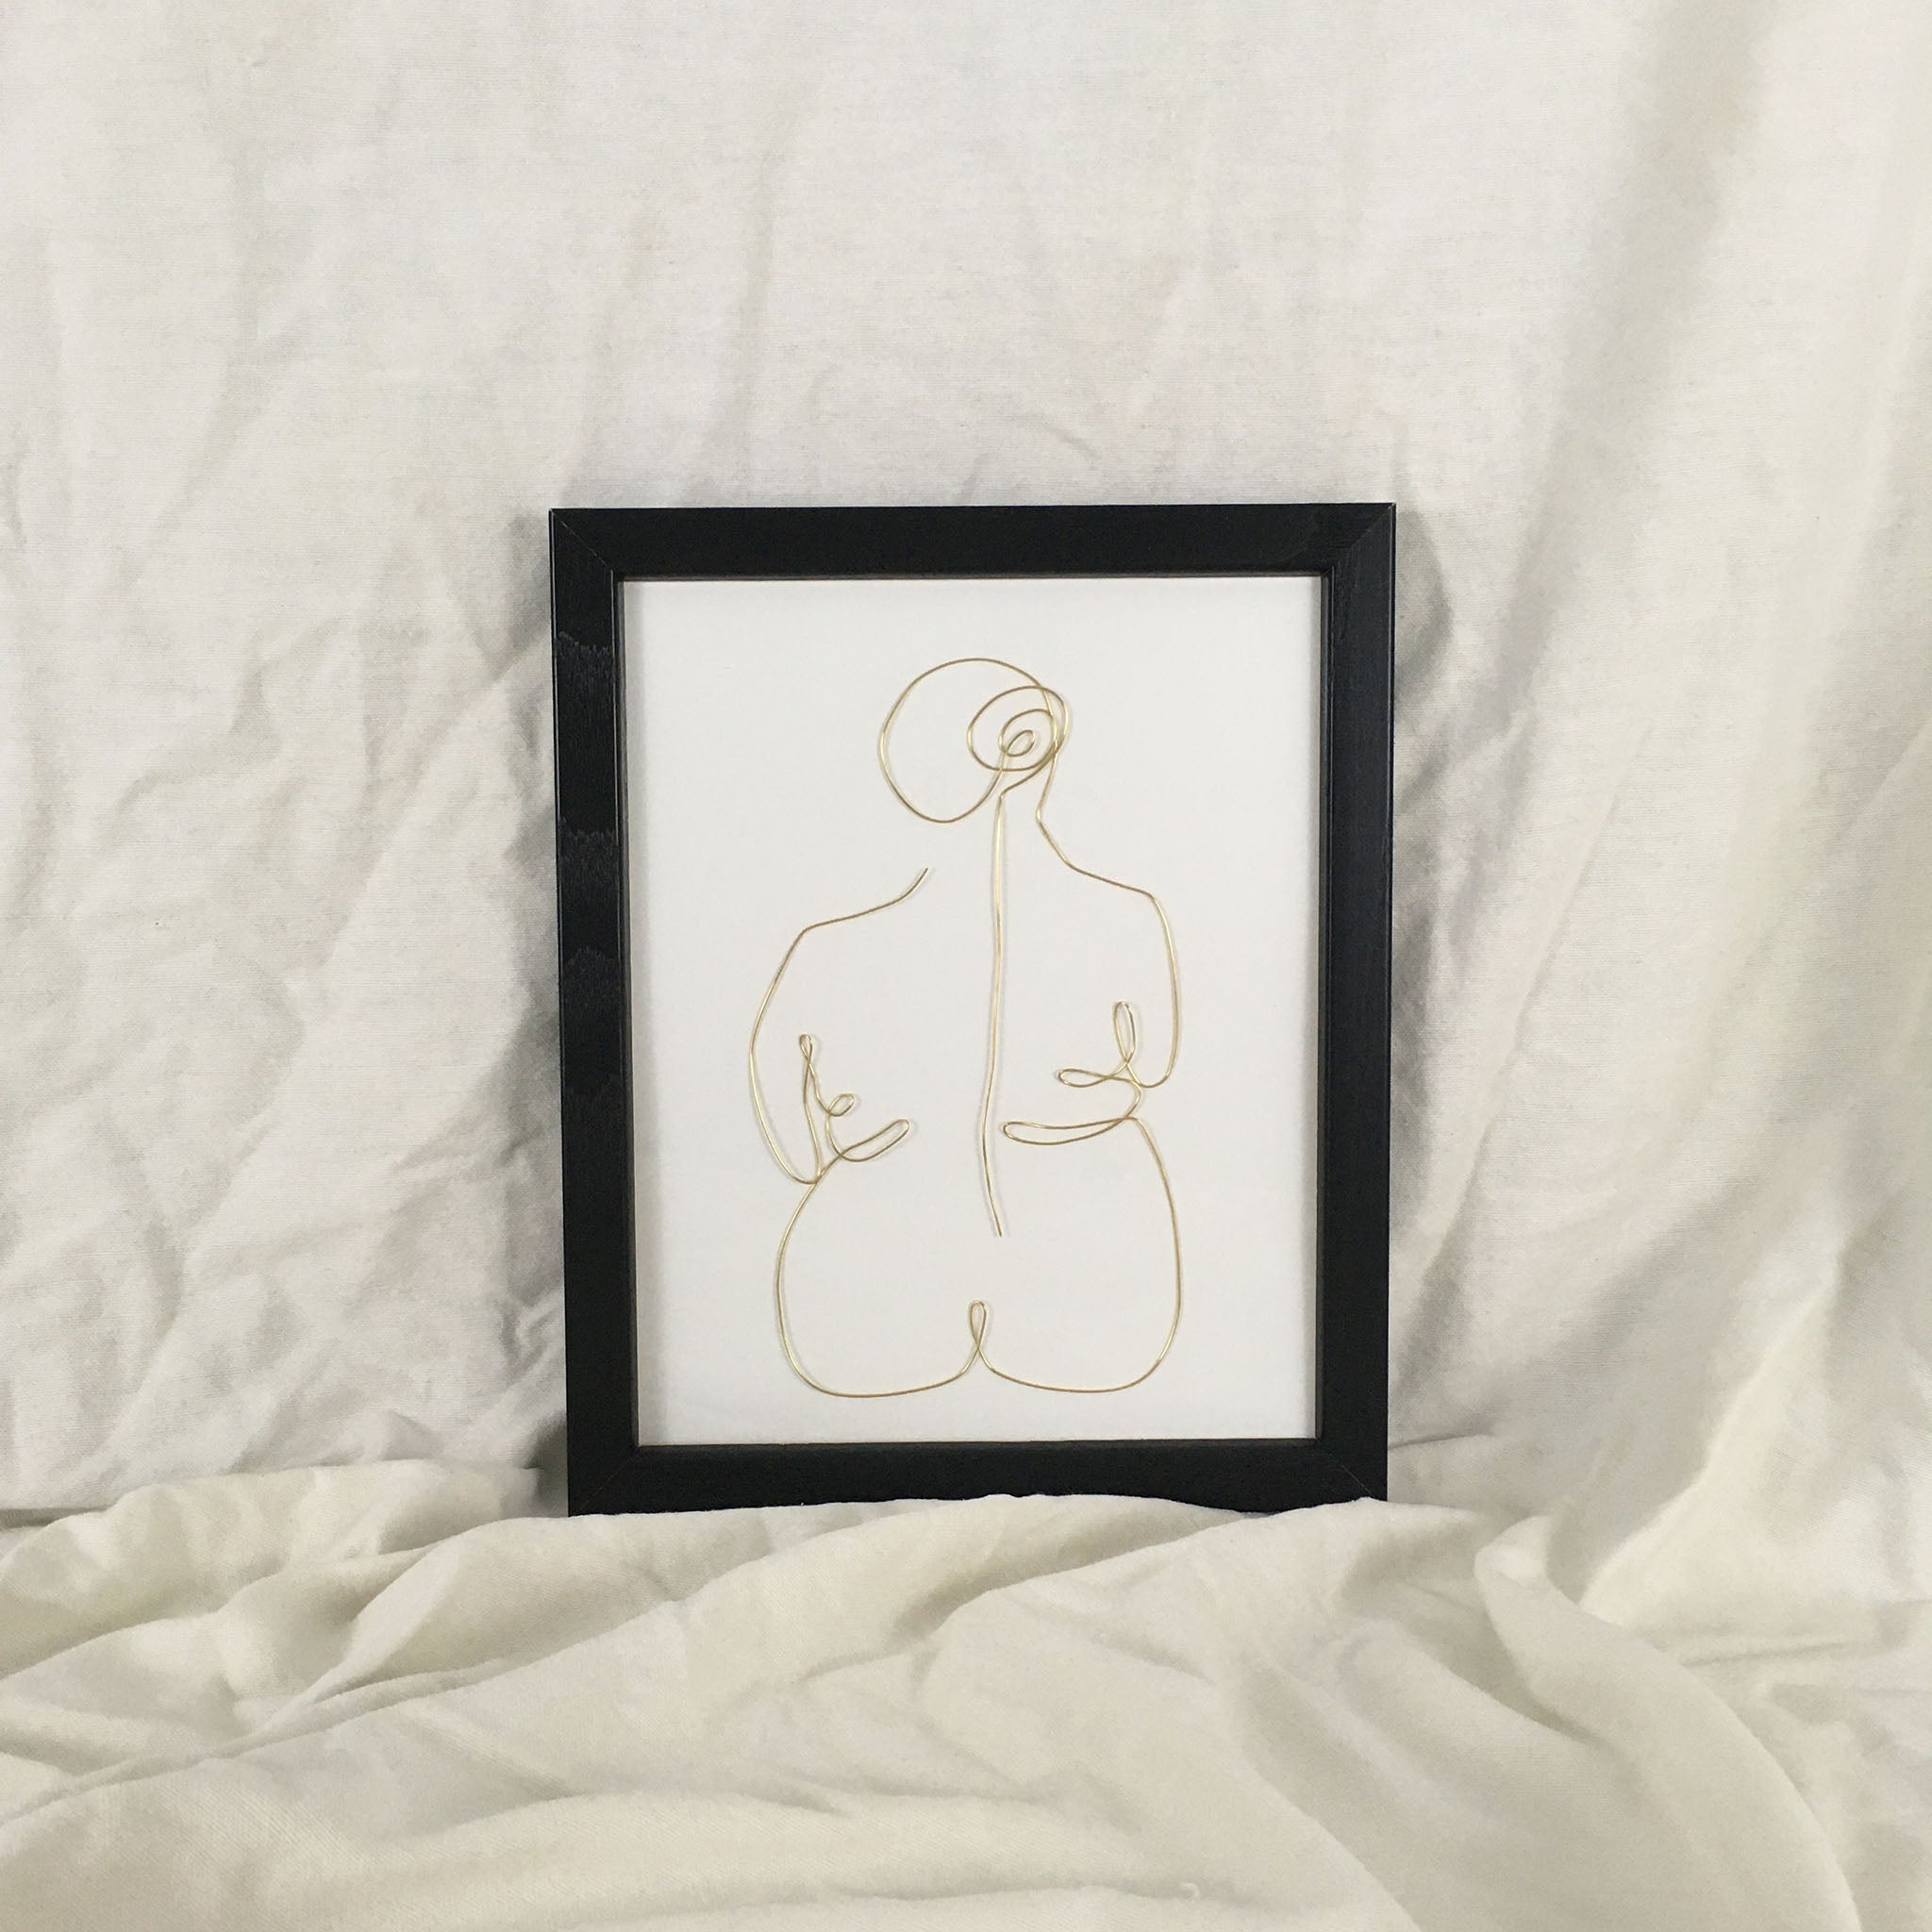 Lounge wire art - black frame gold wire